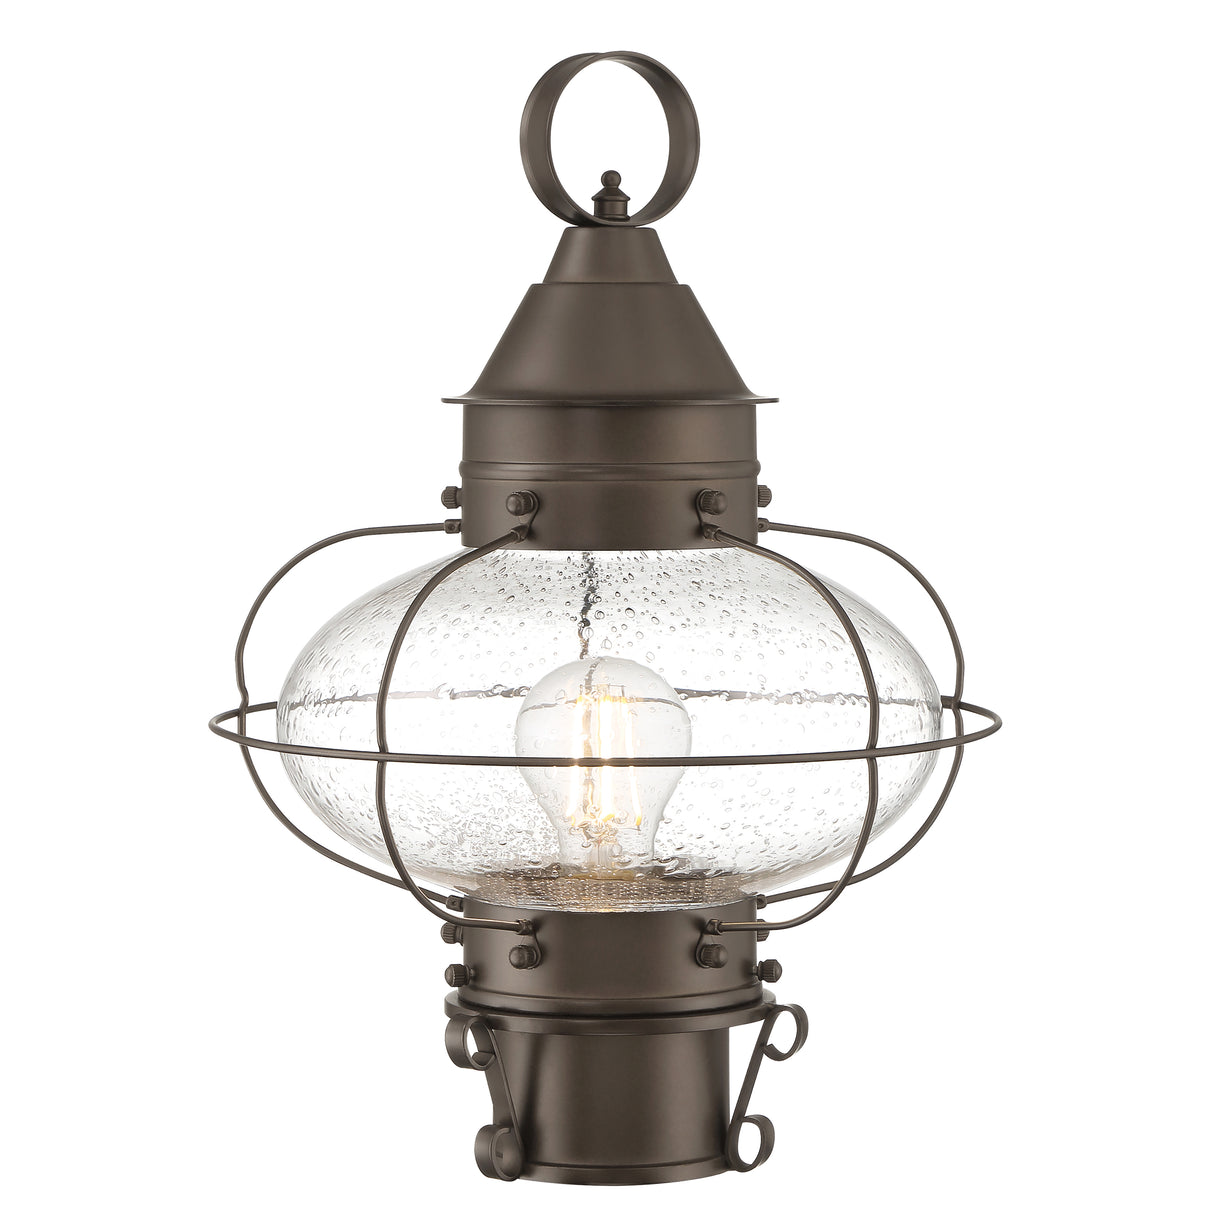 Elk 1321-BR-SE Cottage Onion Outdoor Post Lantern - Bronze with Seeded Glass